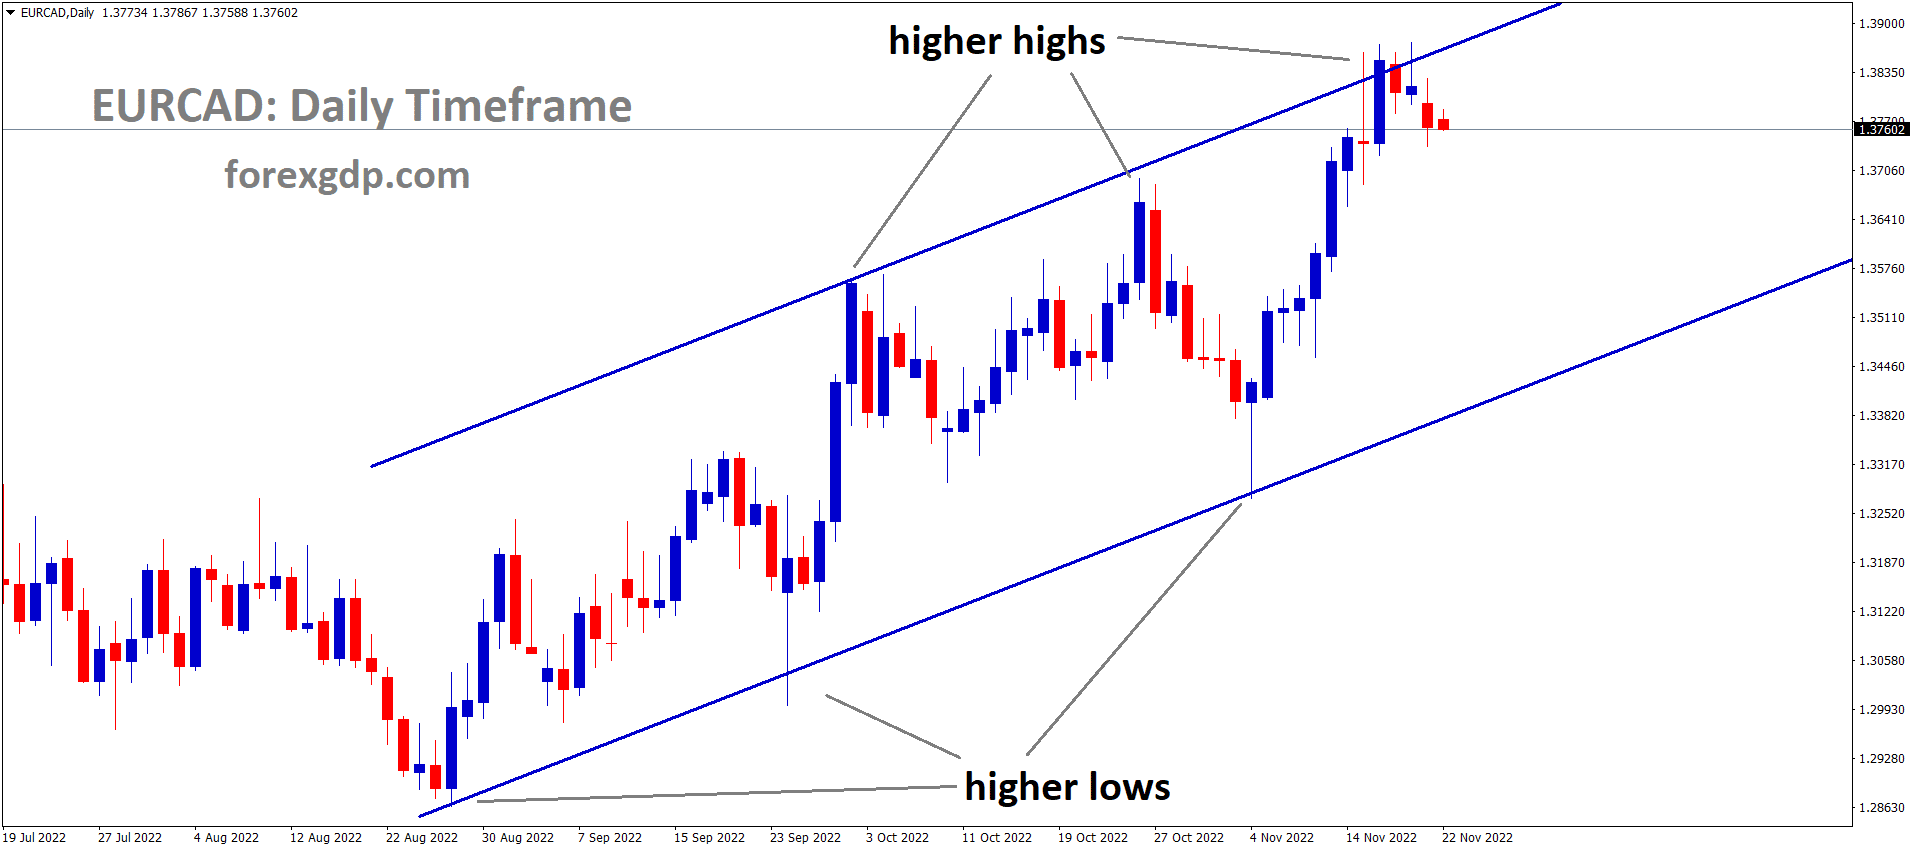 EURCAD is moving in an Ascending channel and the market has fallen from the higher high area of the channel.